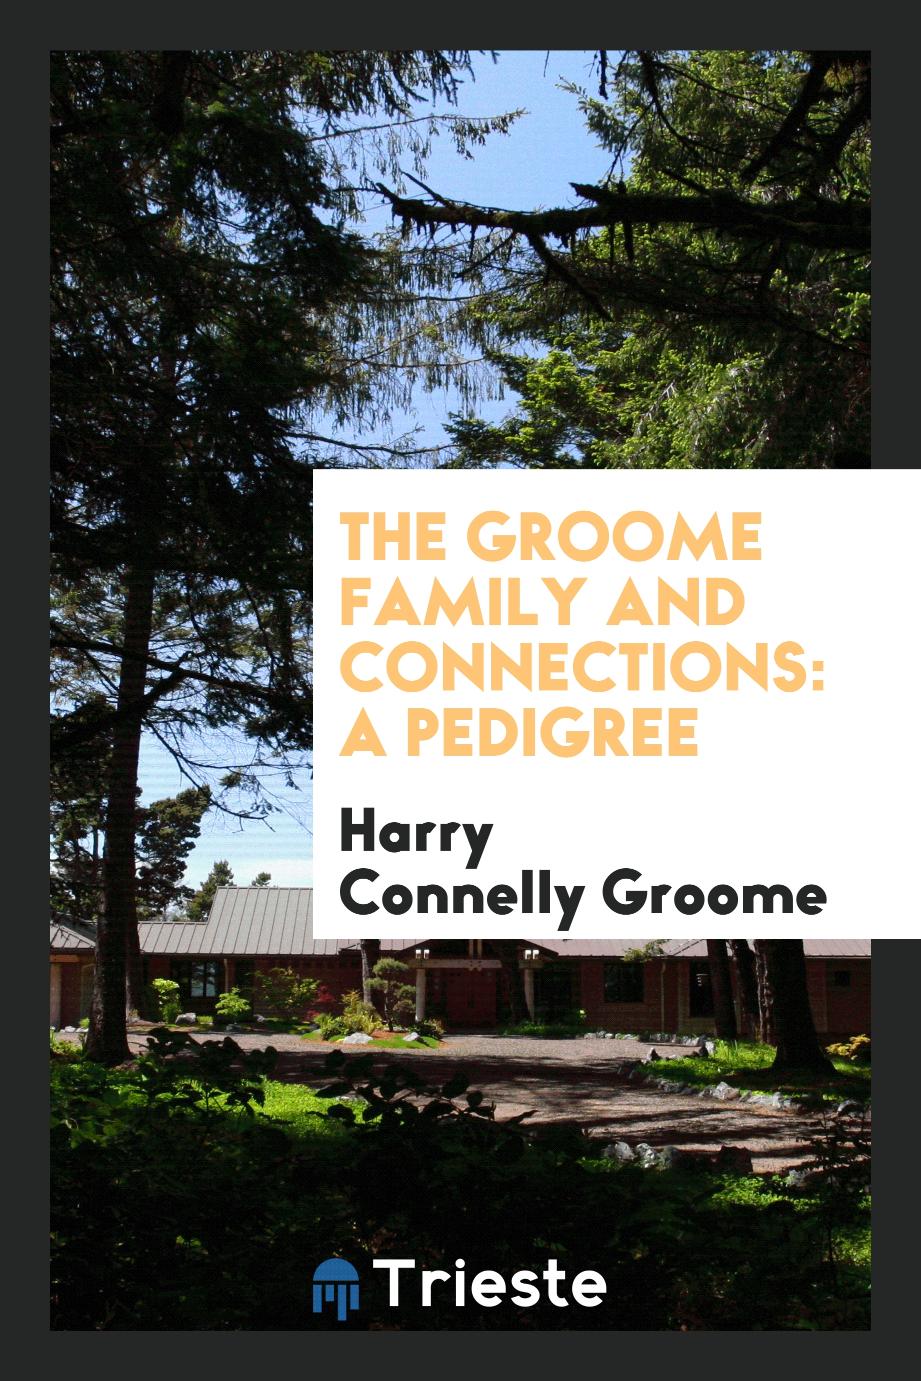 The Groome Family and Connections: A Pedigree